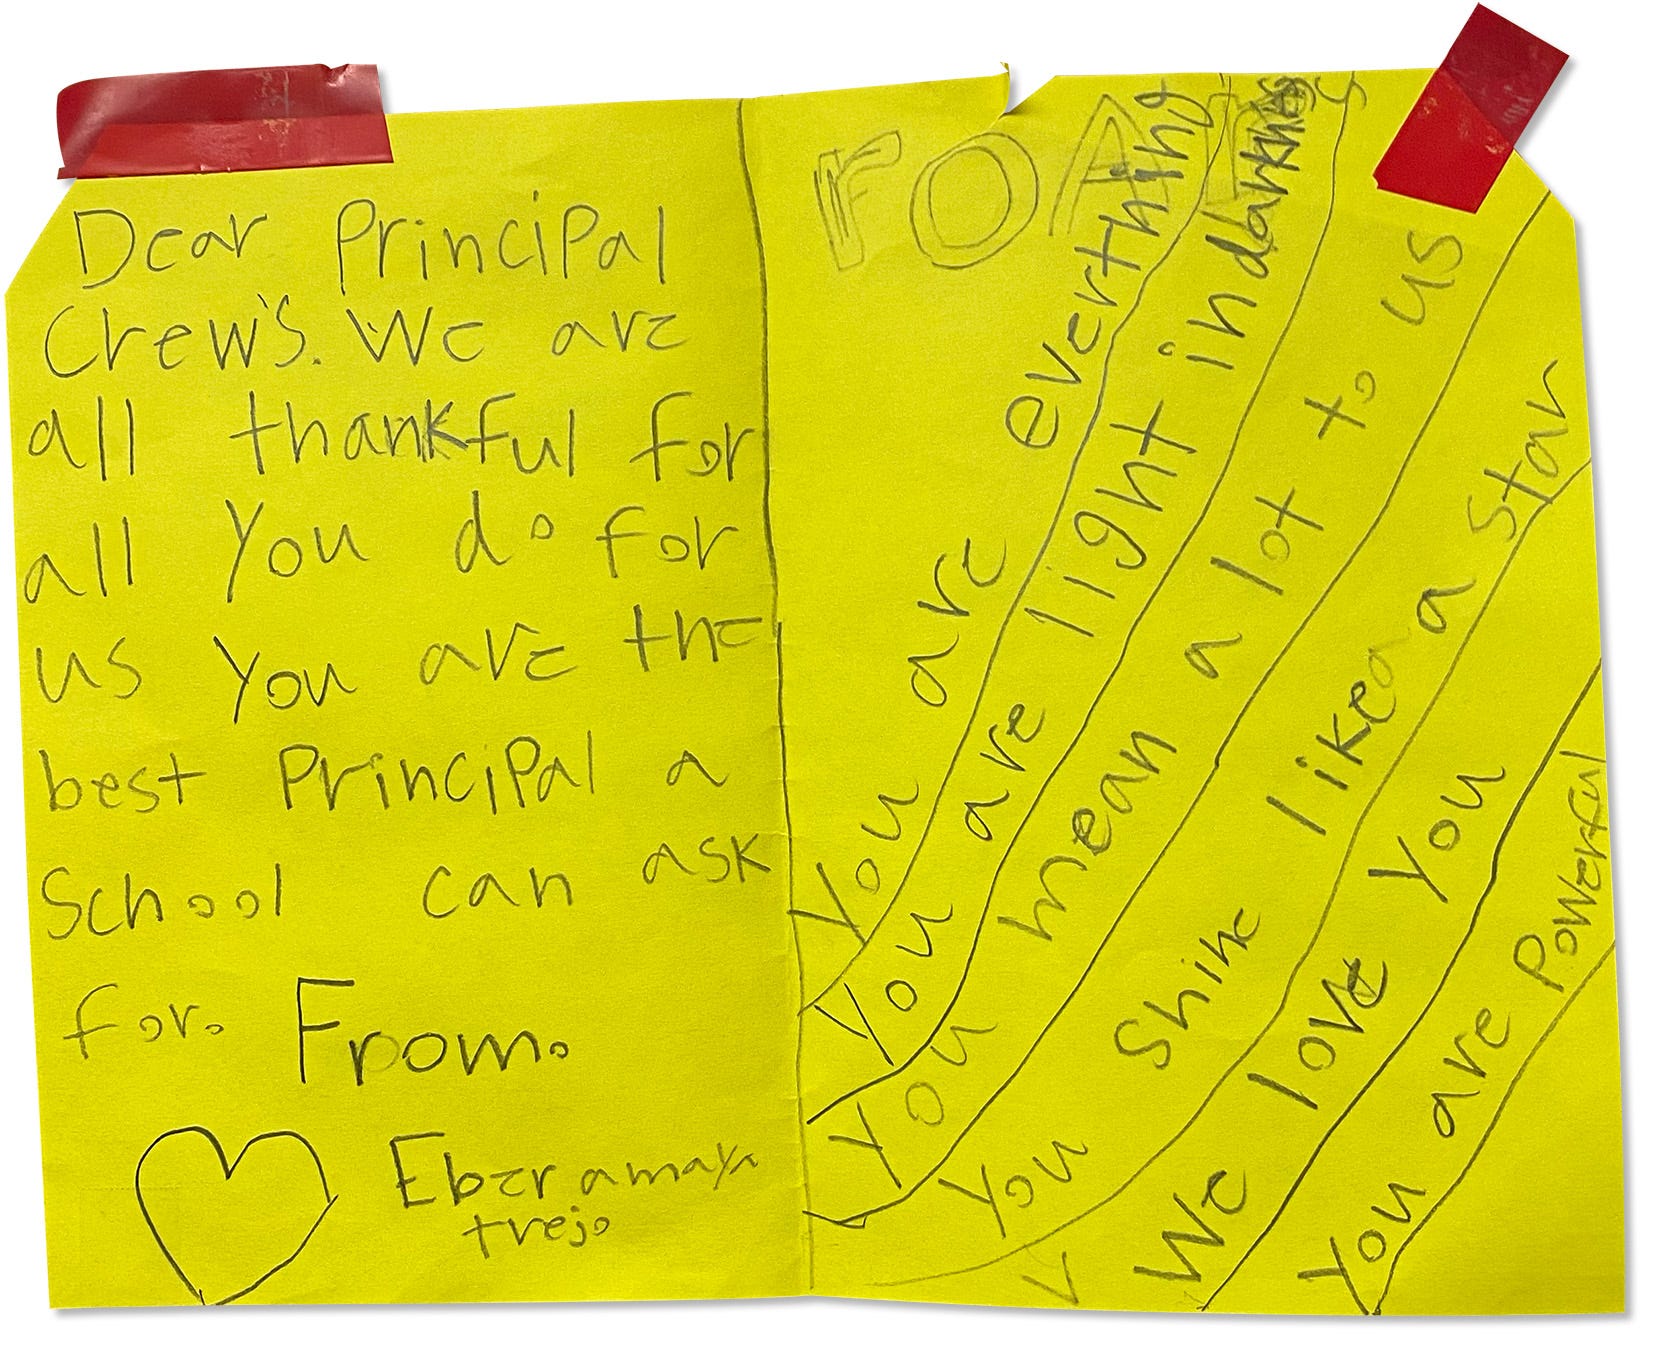 A student's handmade card for Cora Kelly Principal Jasibi Crews expresses gratitude for her hard work. "You are the best principal a school can ask for."